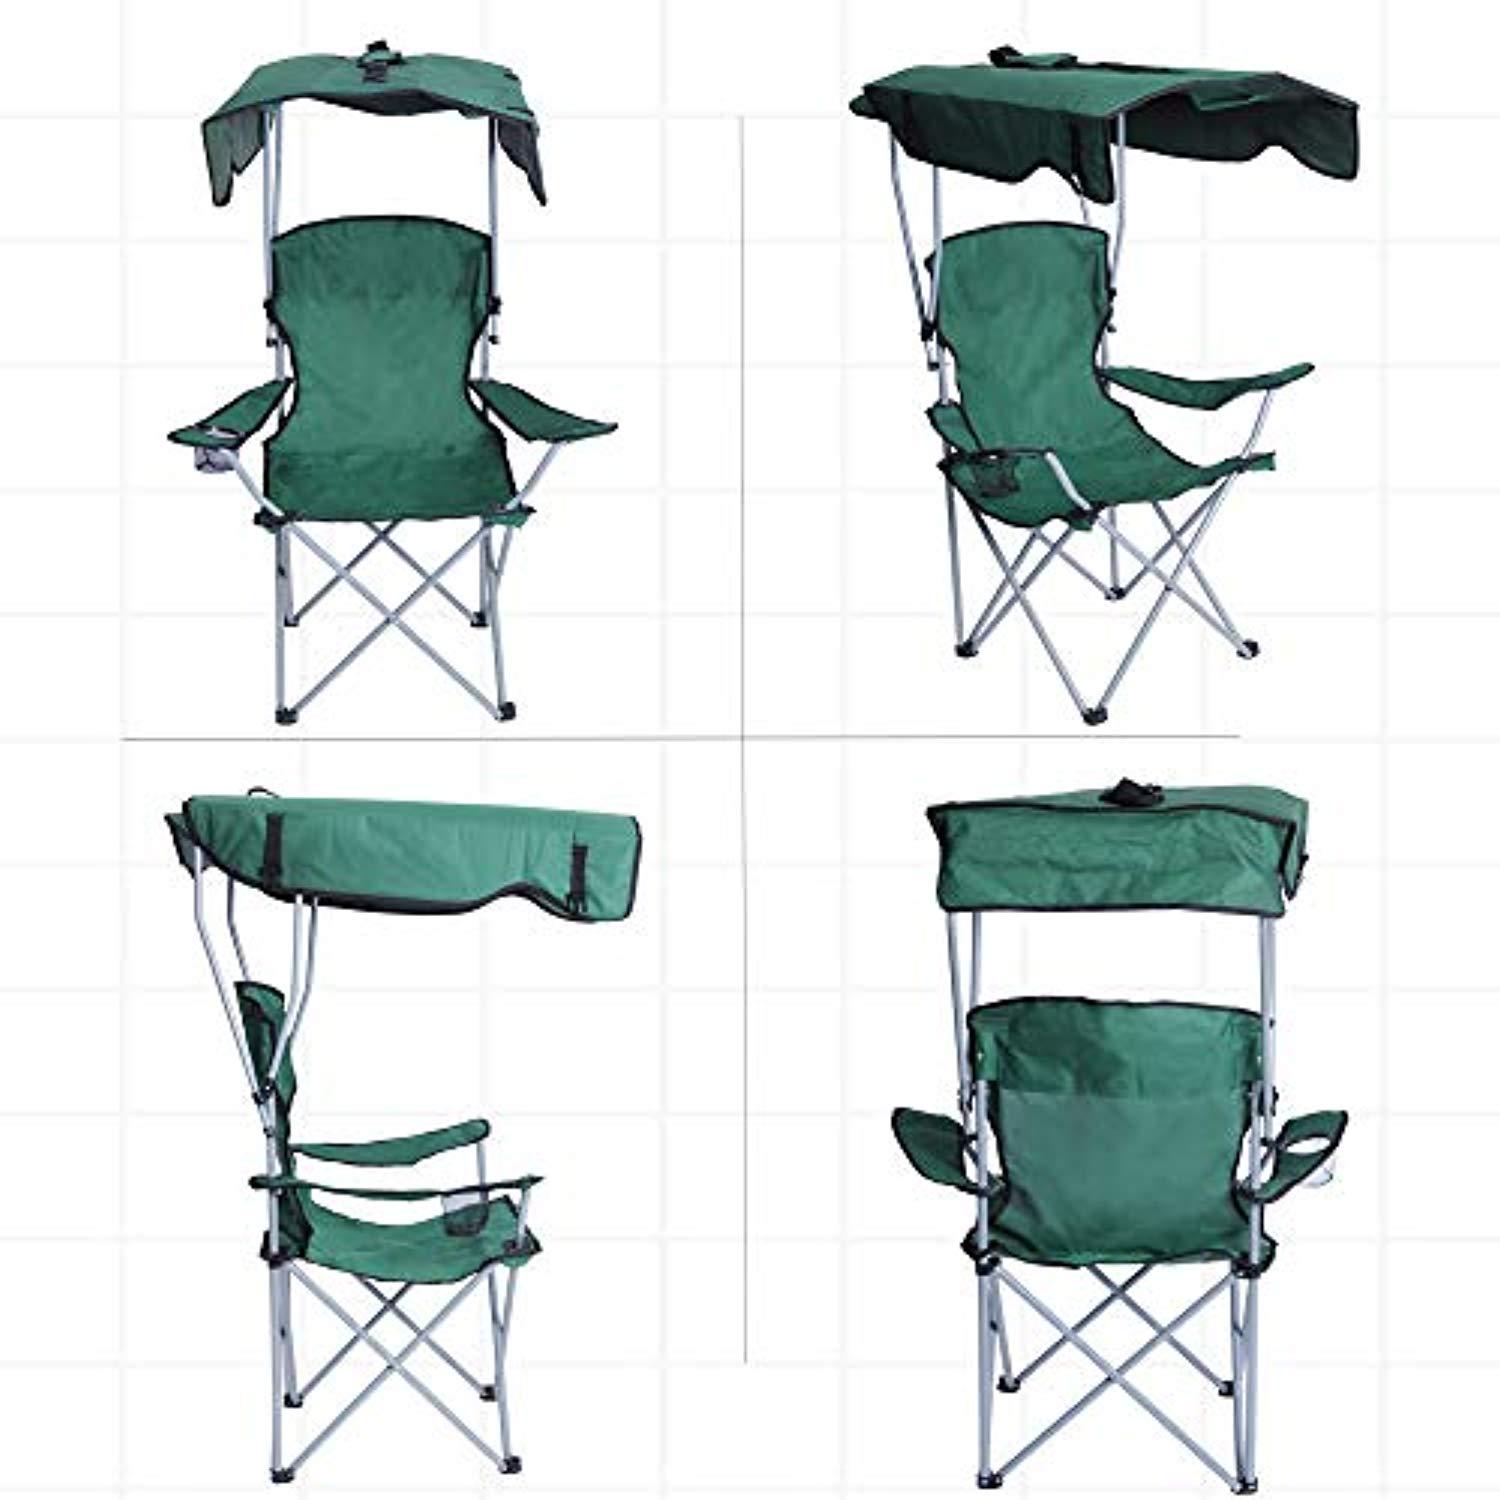 Bosonshop Portable Camping Chairs with Shade Canopy Original Green 30”Lx17”Wx50”H